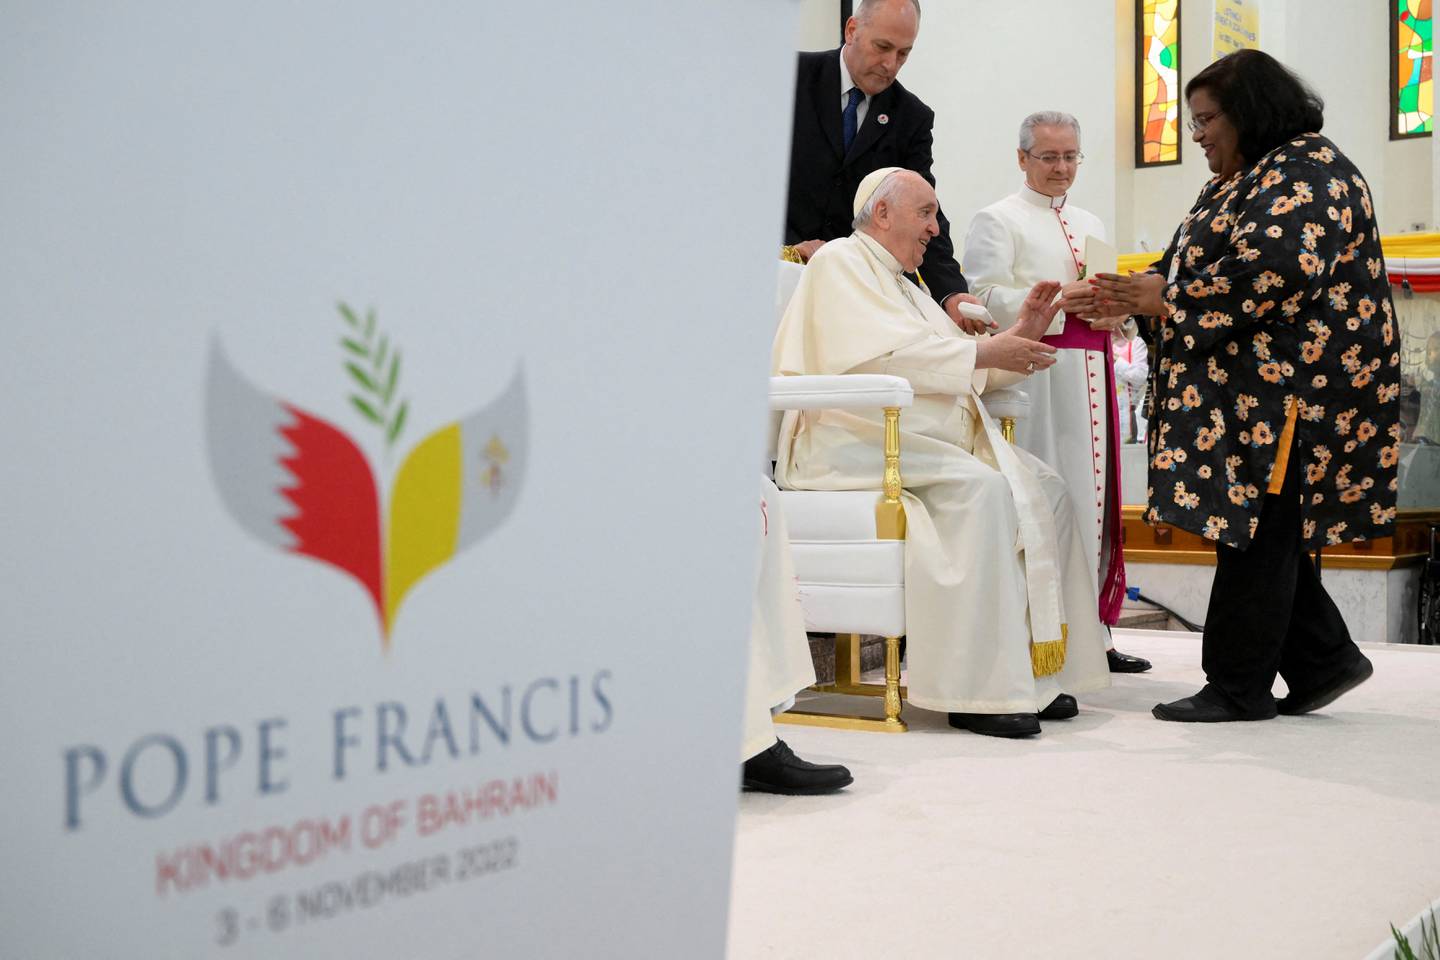 Pope Francis spoke to Catholic families and priests on the last day of his tour of Bahrain. Reuters